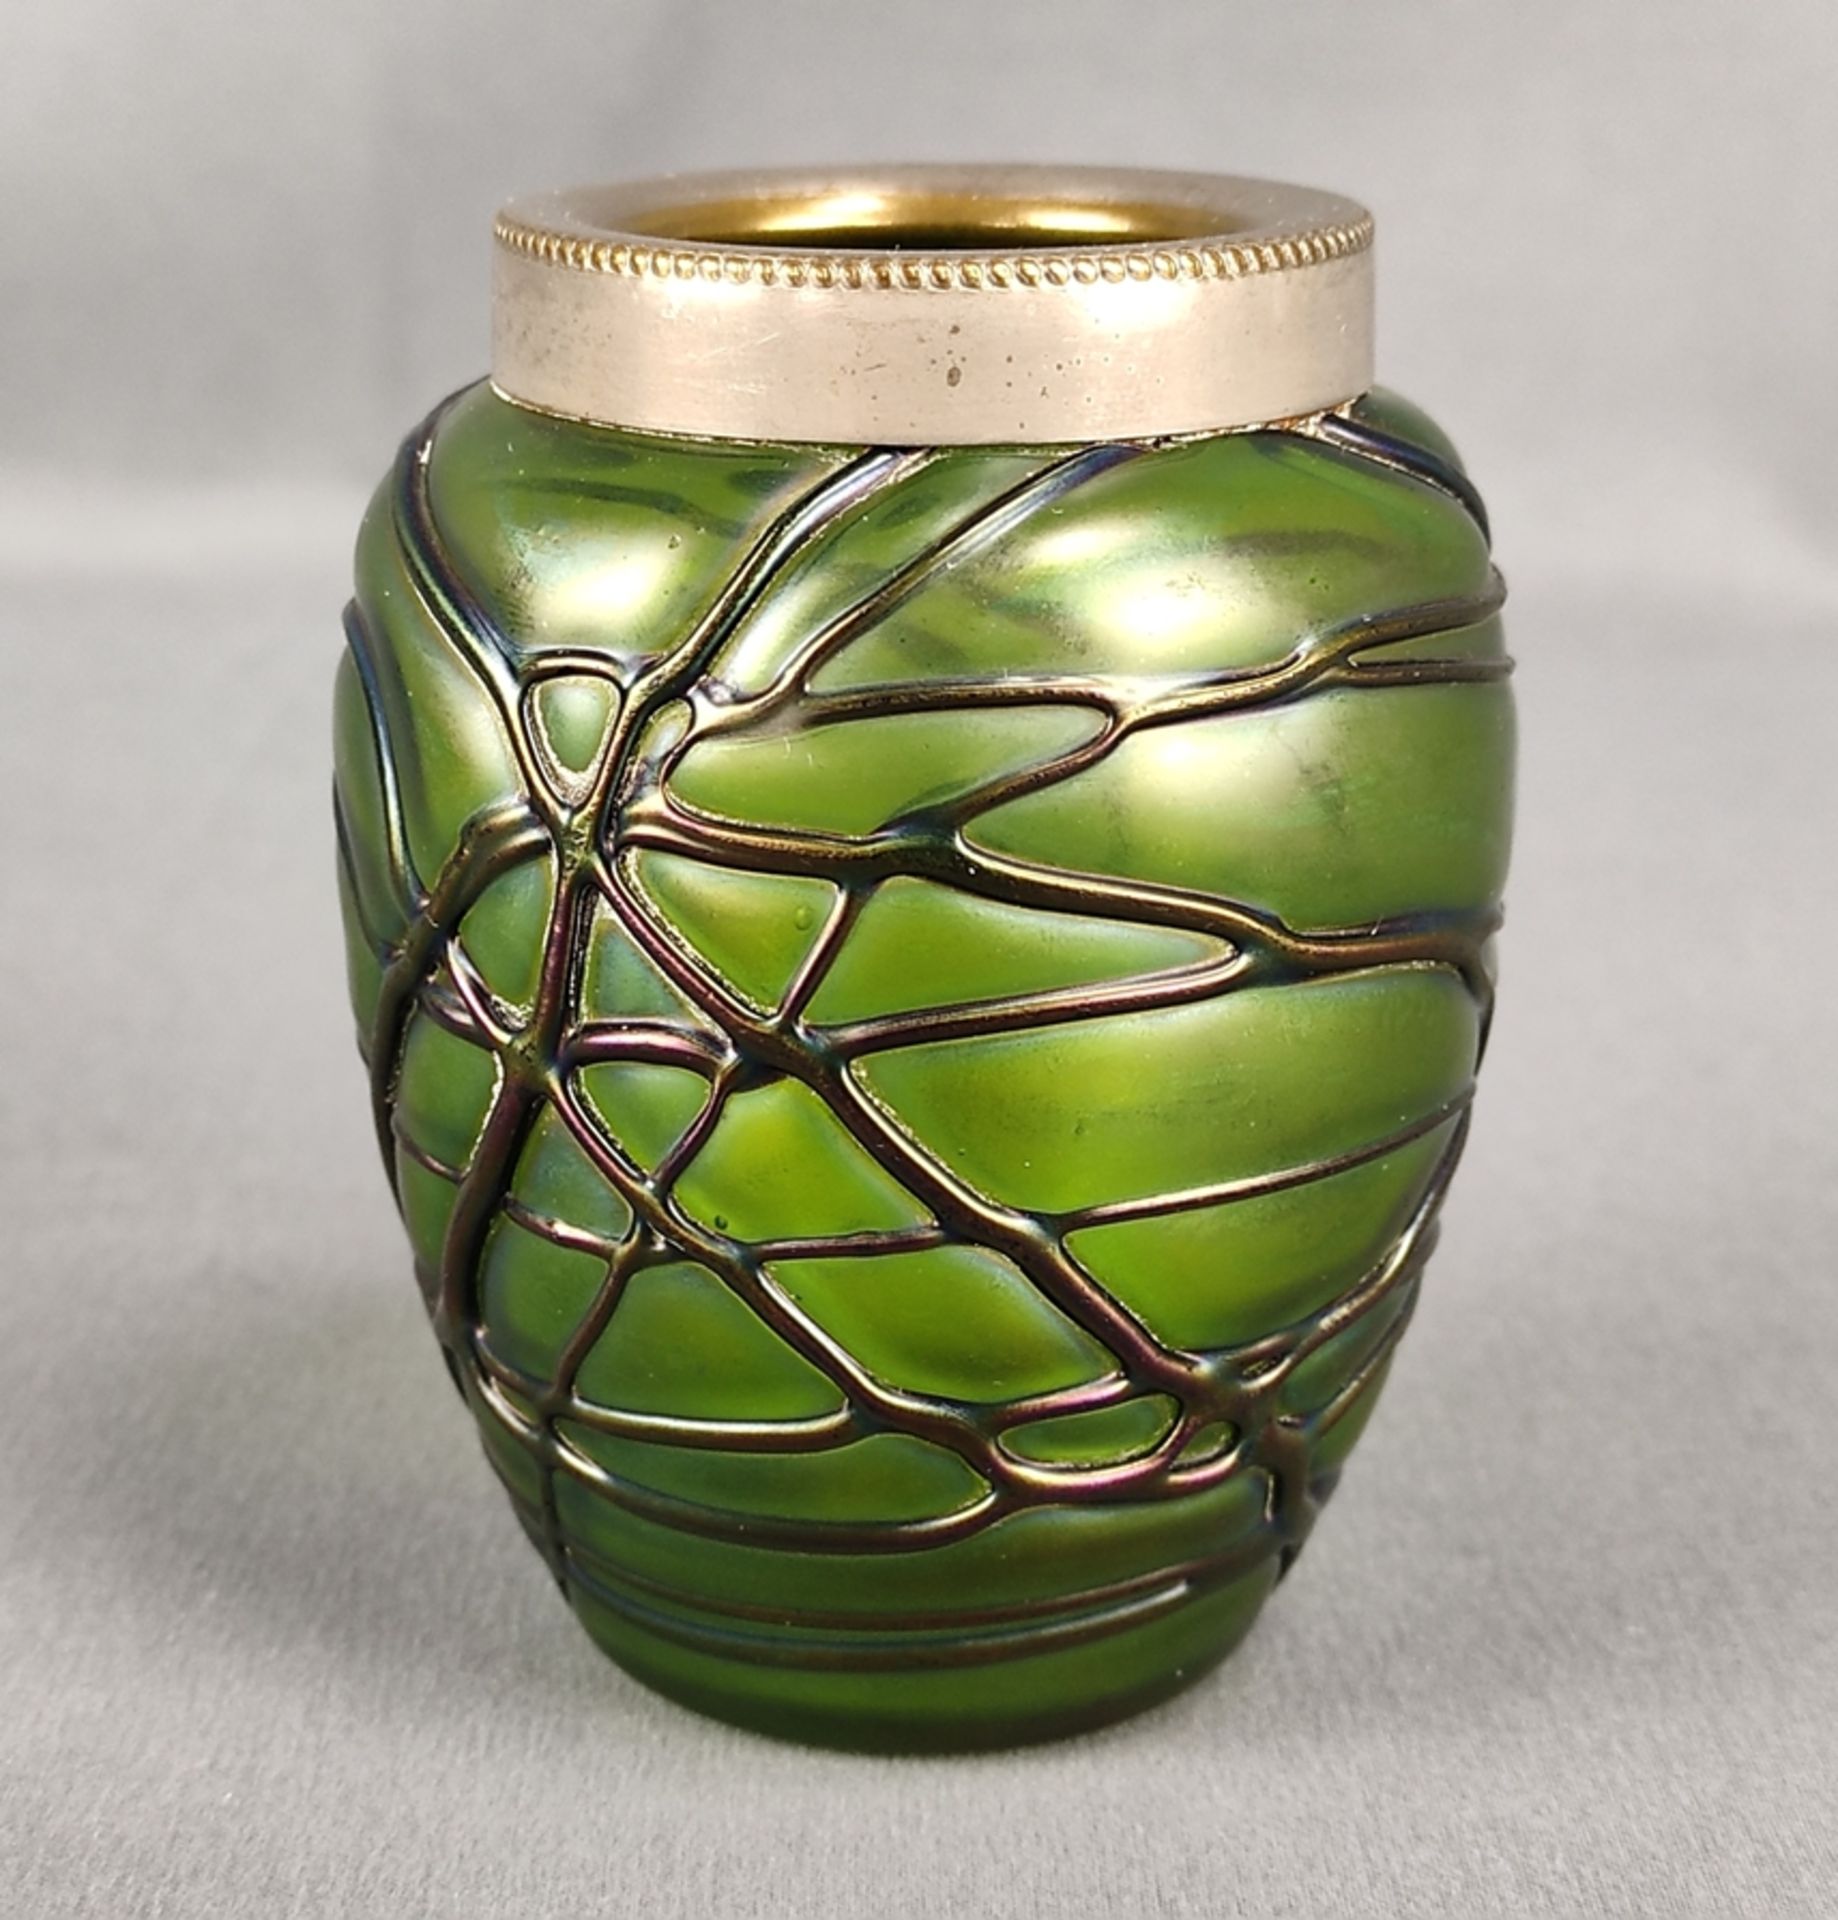 Small vase, slightly bulged, rim mounted, greenish glass, iridescent with fused green threads, irre